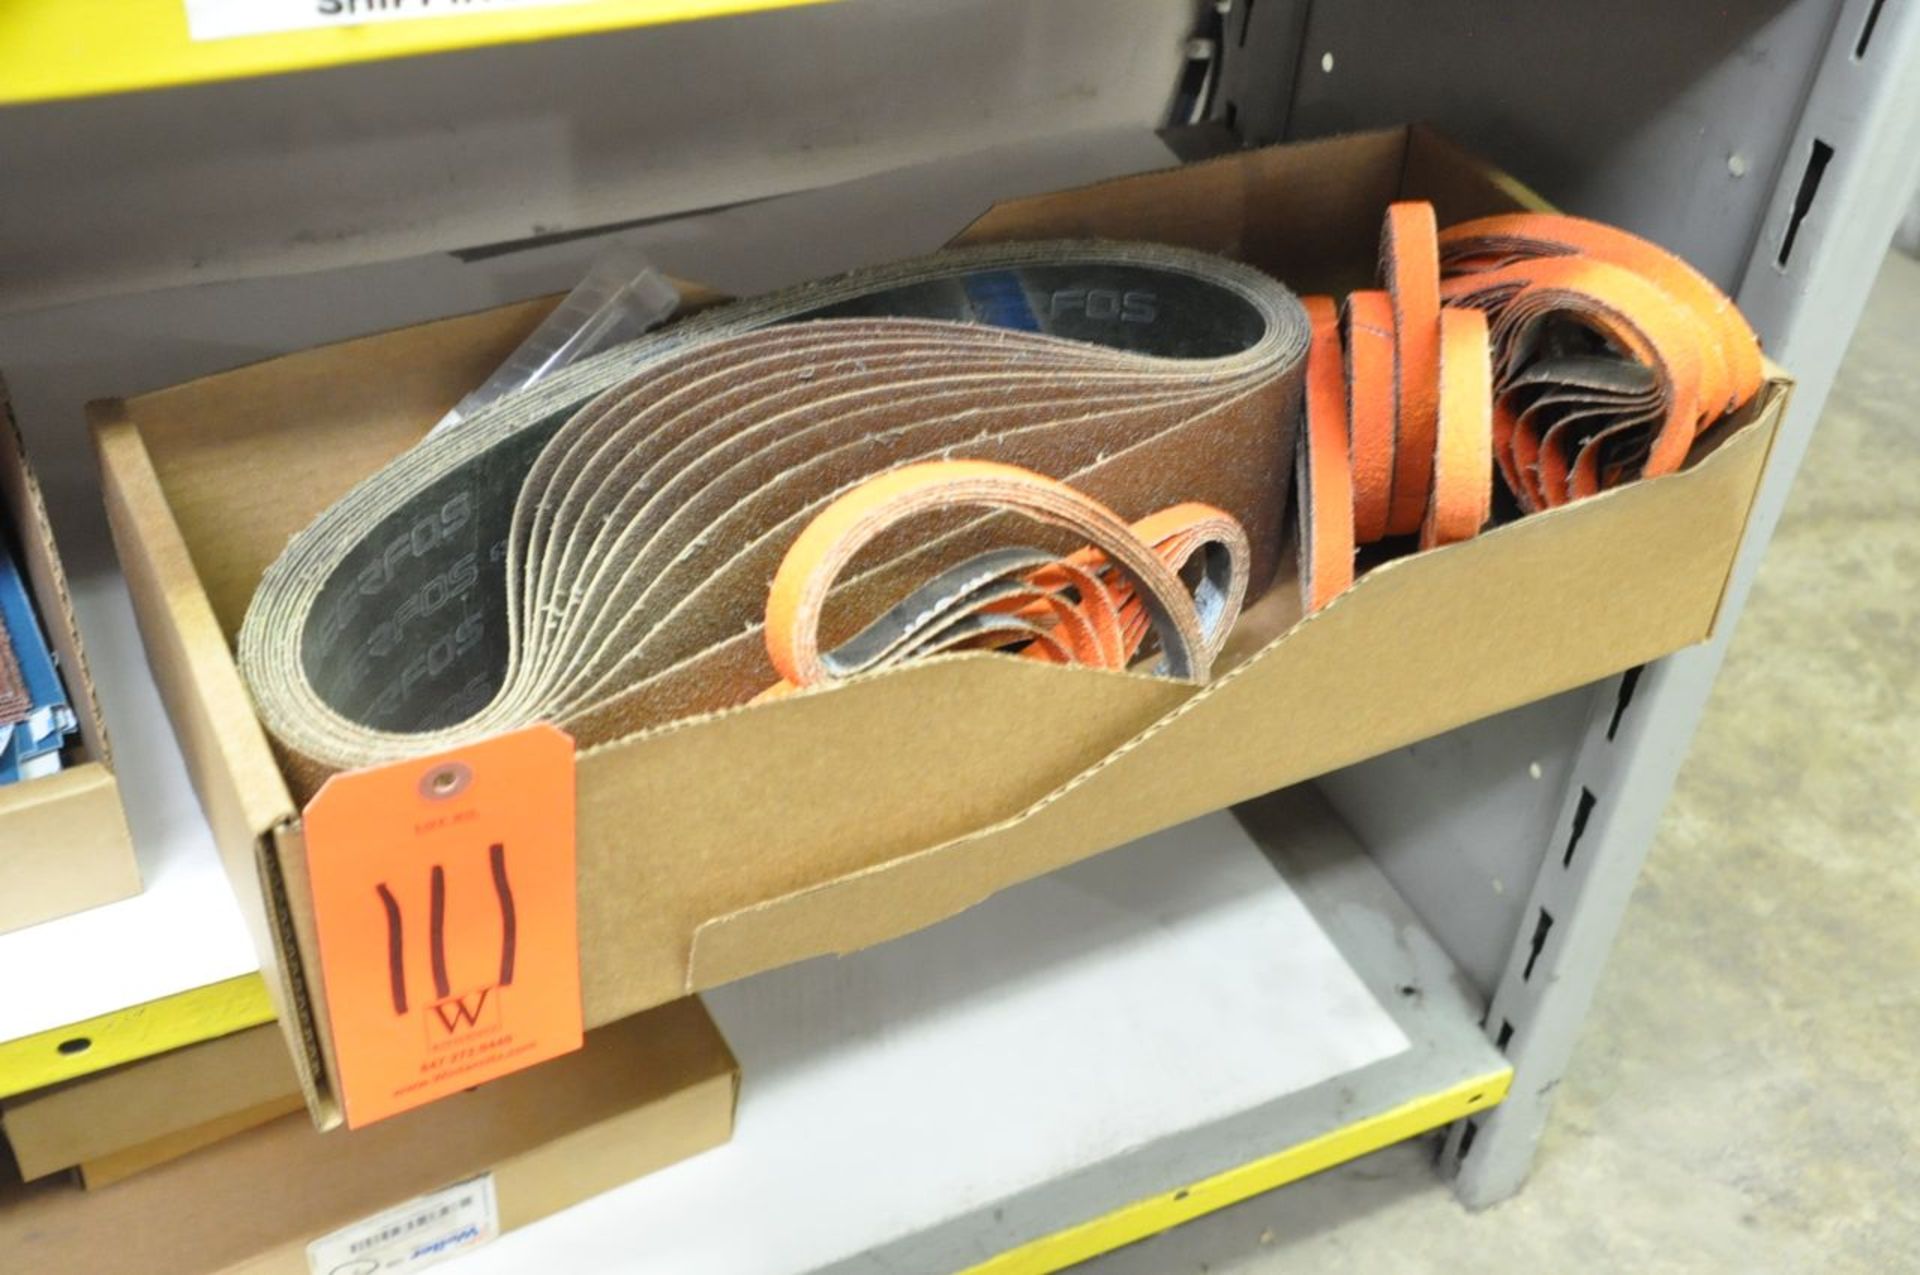 Lot - Various Sandpaper, Sanding Belts, and Wire Wheels in (3) Boxes on (2) Shelves, (Storeroom) - Image 4 of 5